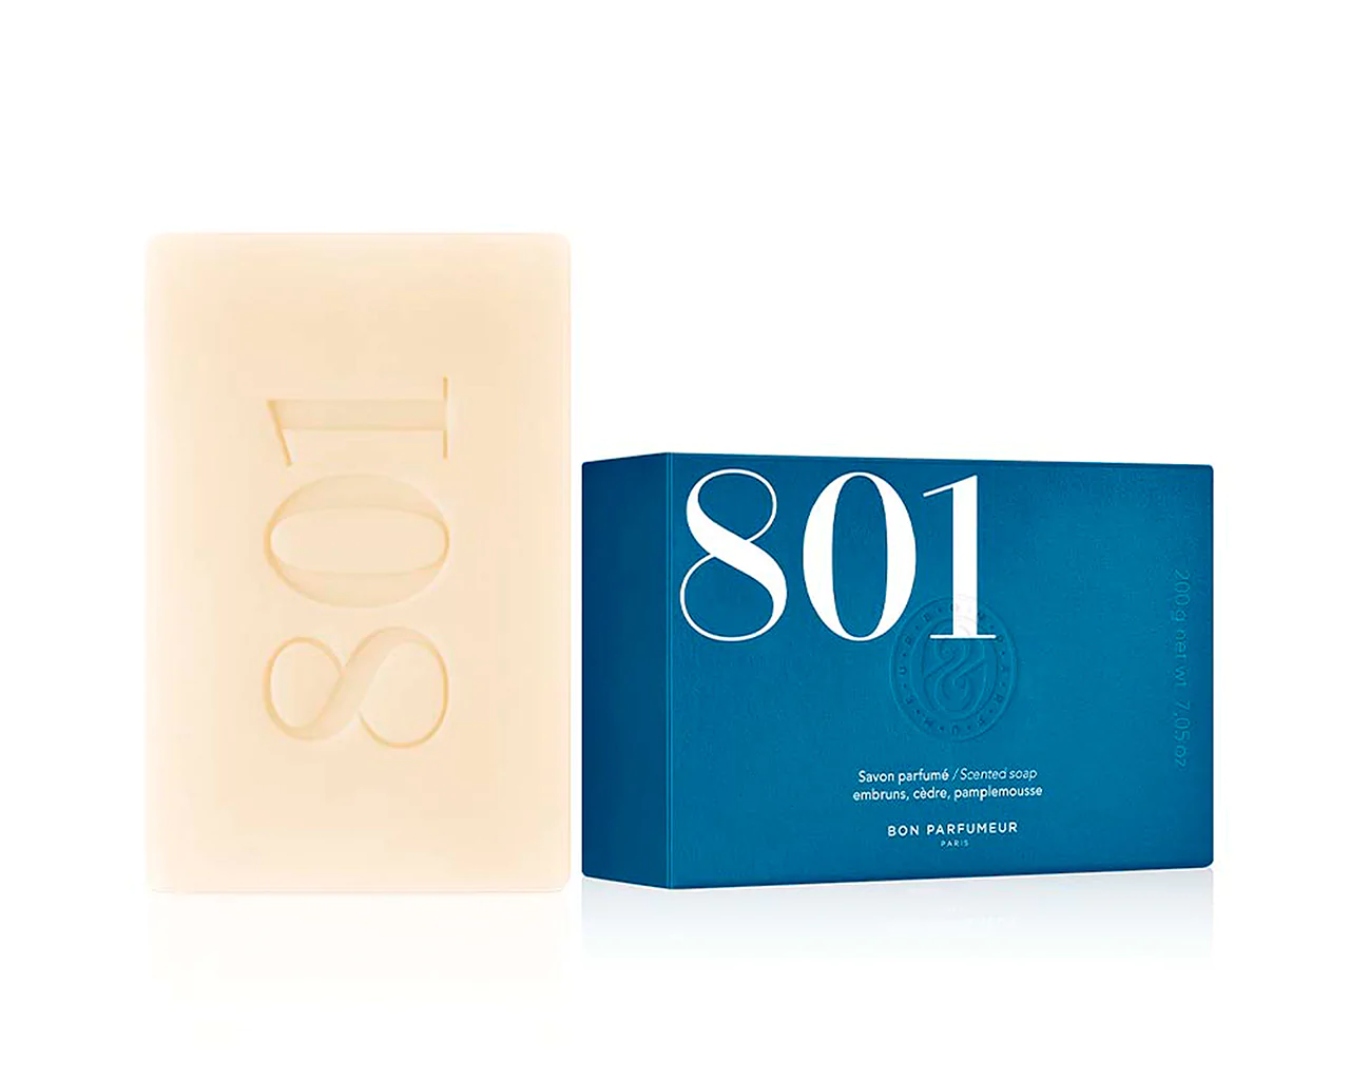 An off-white bar of soap and blue box which both have '801' in large lettering on the front.